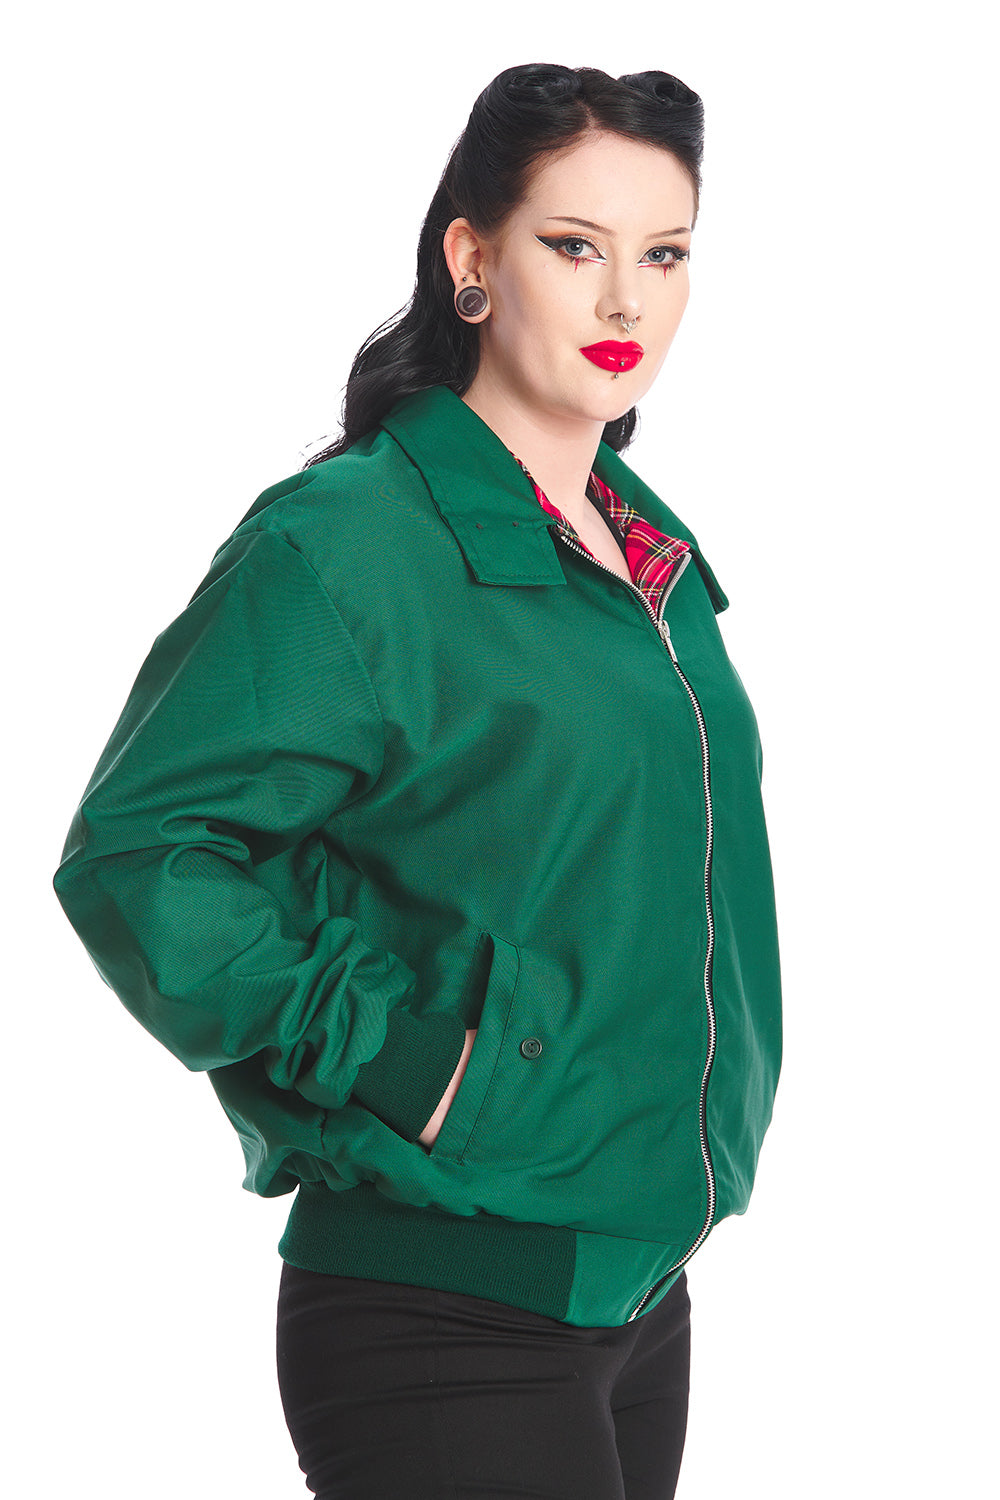 Gothabilly model in a green bomber jacket with red tartan lining.